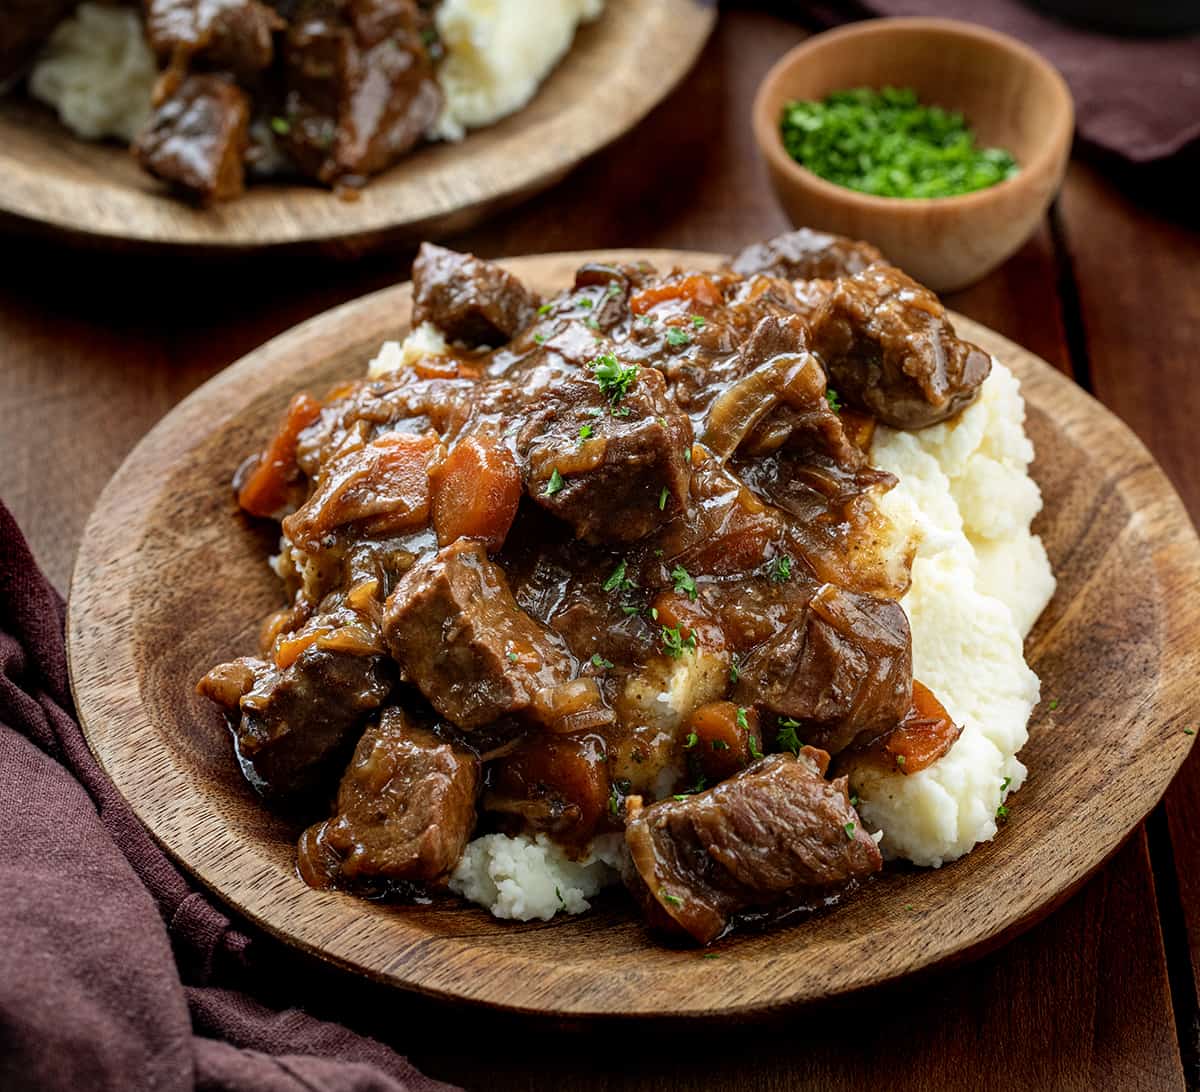 Plates of Slow Cooker Pot Roast over mashed potatoes.